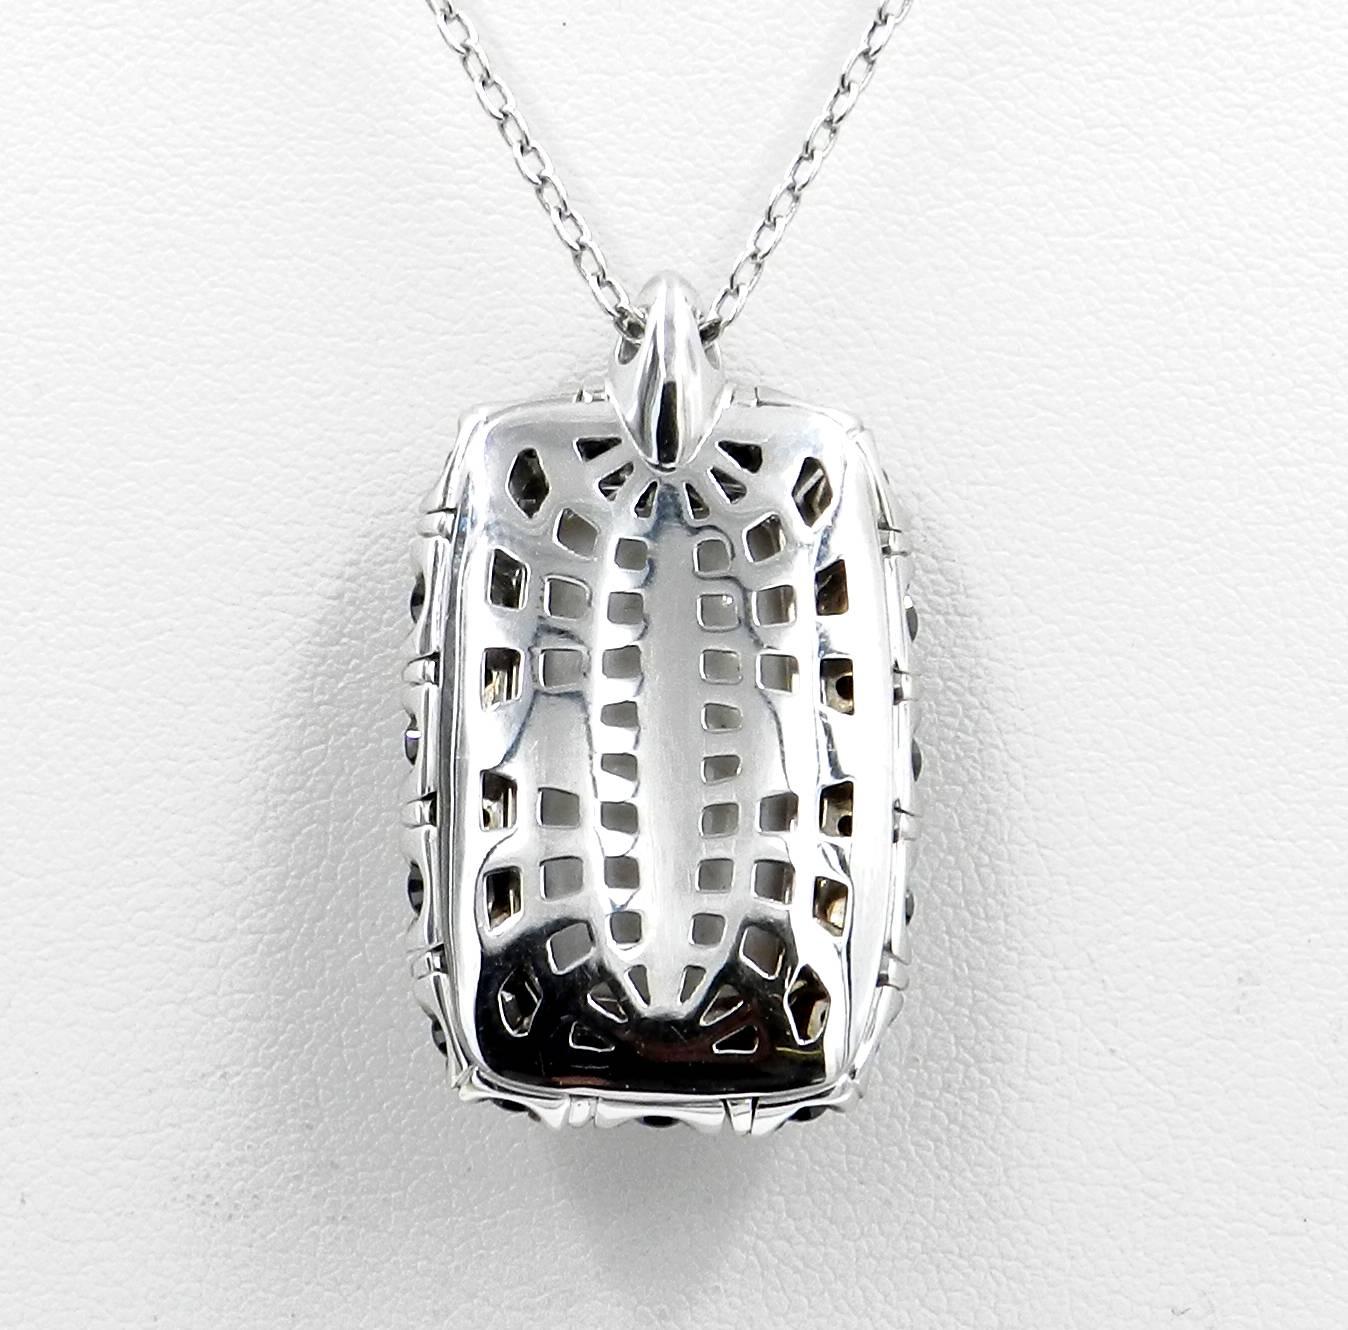  18KT White Gold GARAVELLI Pendant With Chain With BLACK DIAMONDS & WHITE COGOLON
The pendant measures MM.23X33
Chain lenght cm 48 with adjustement loop at cm 39
GOLD  :grs 15,70
BLACK DIAMONDS ct : 3,65
SEMIPRECIOUS WHITE COGOLON  ct : 17,75
Made